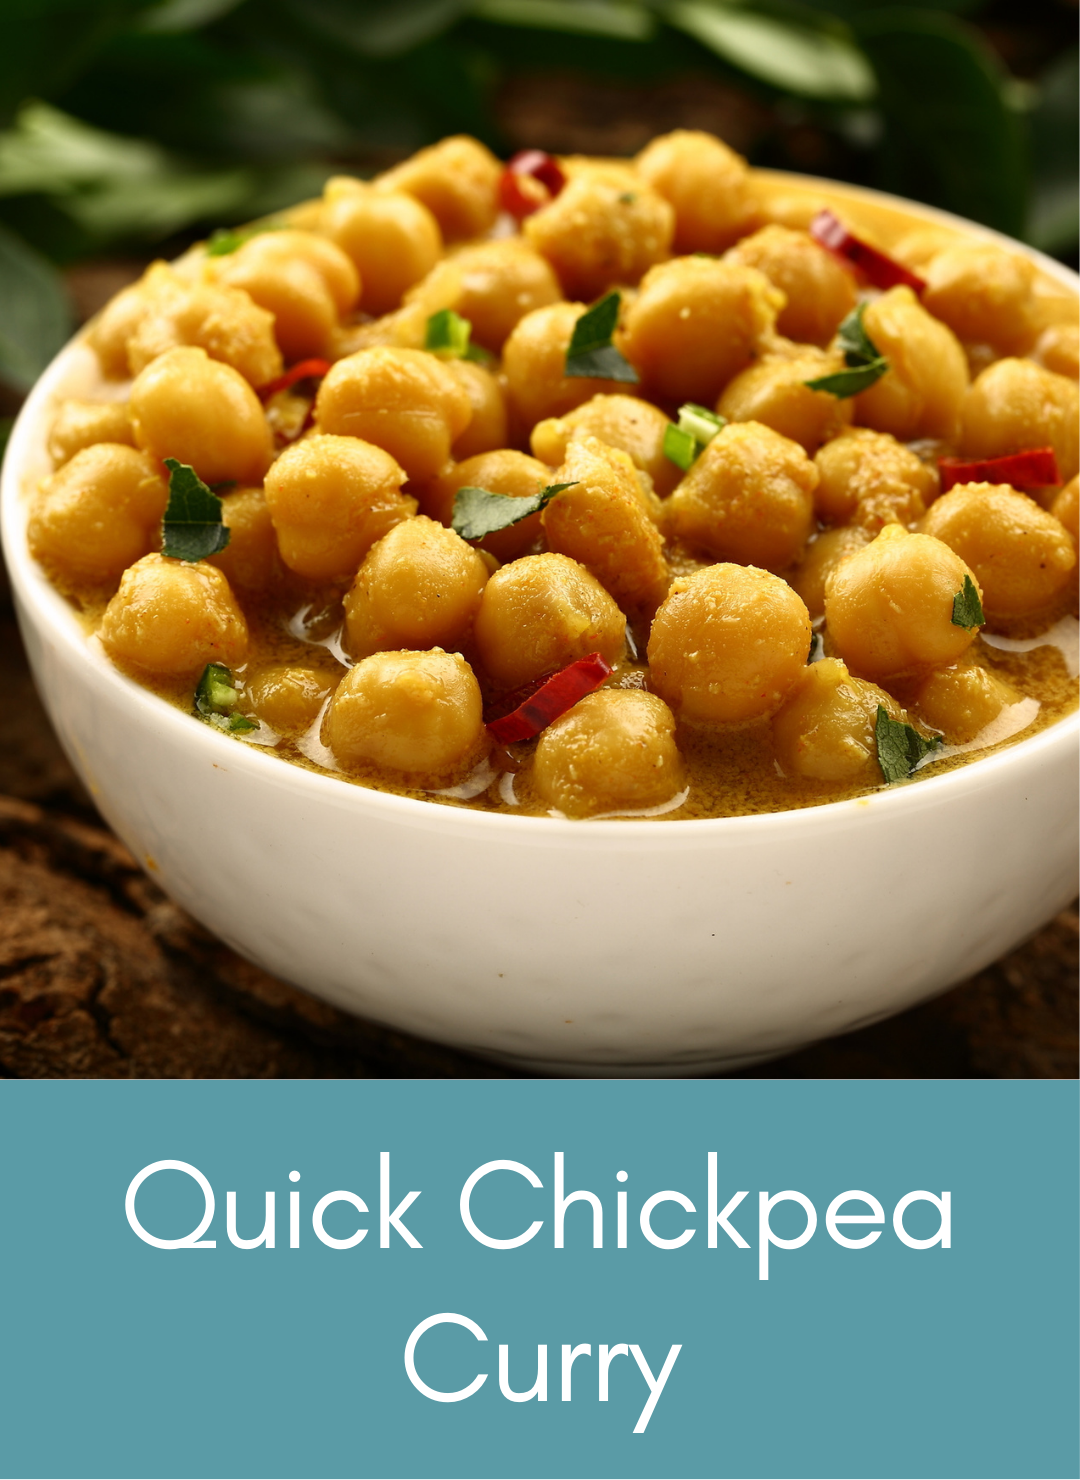 Quick chickpea curry plant-based whole food Picture with link to recipe